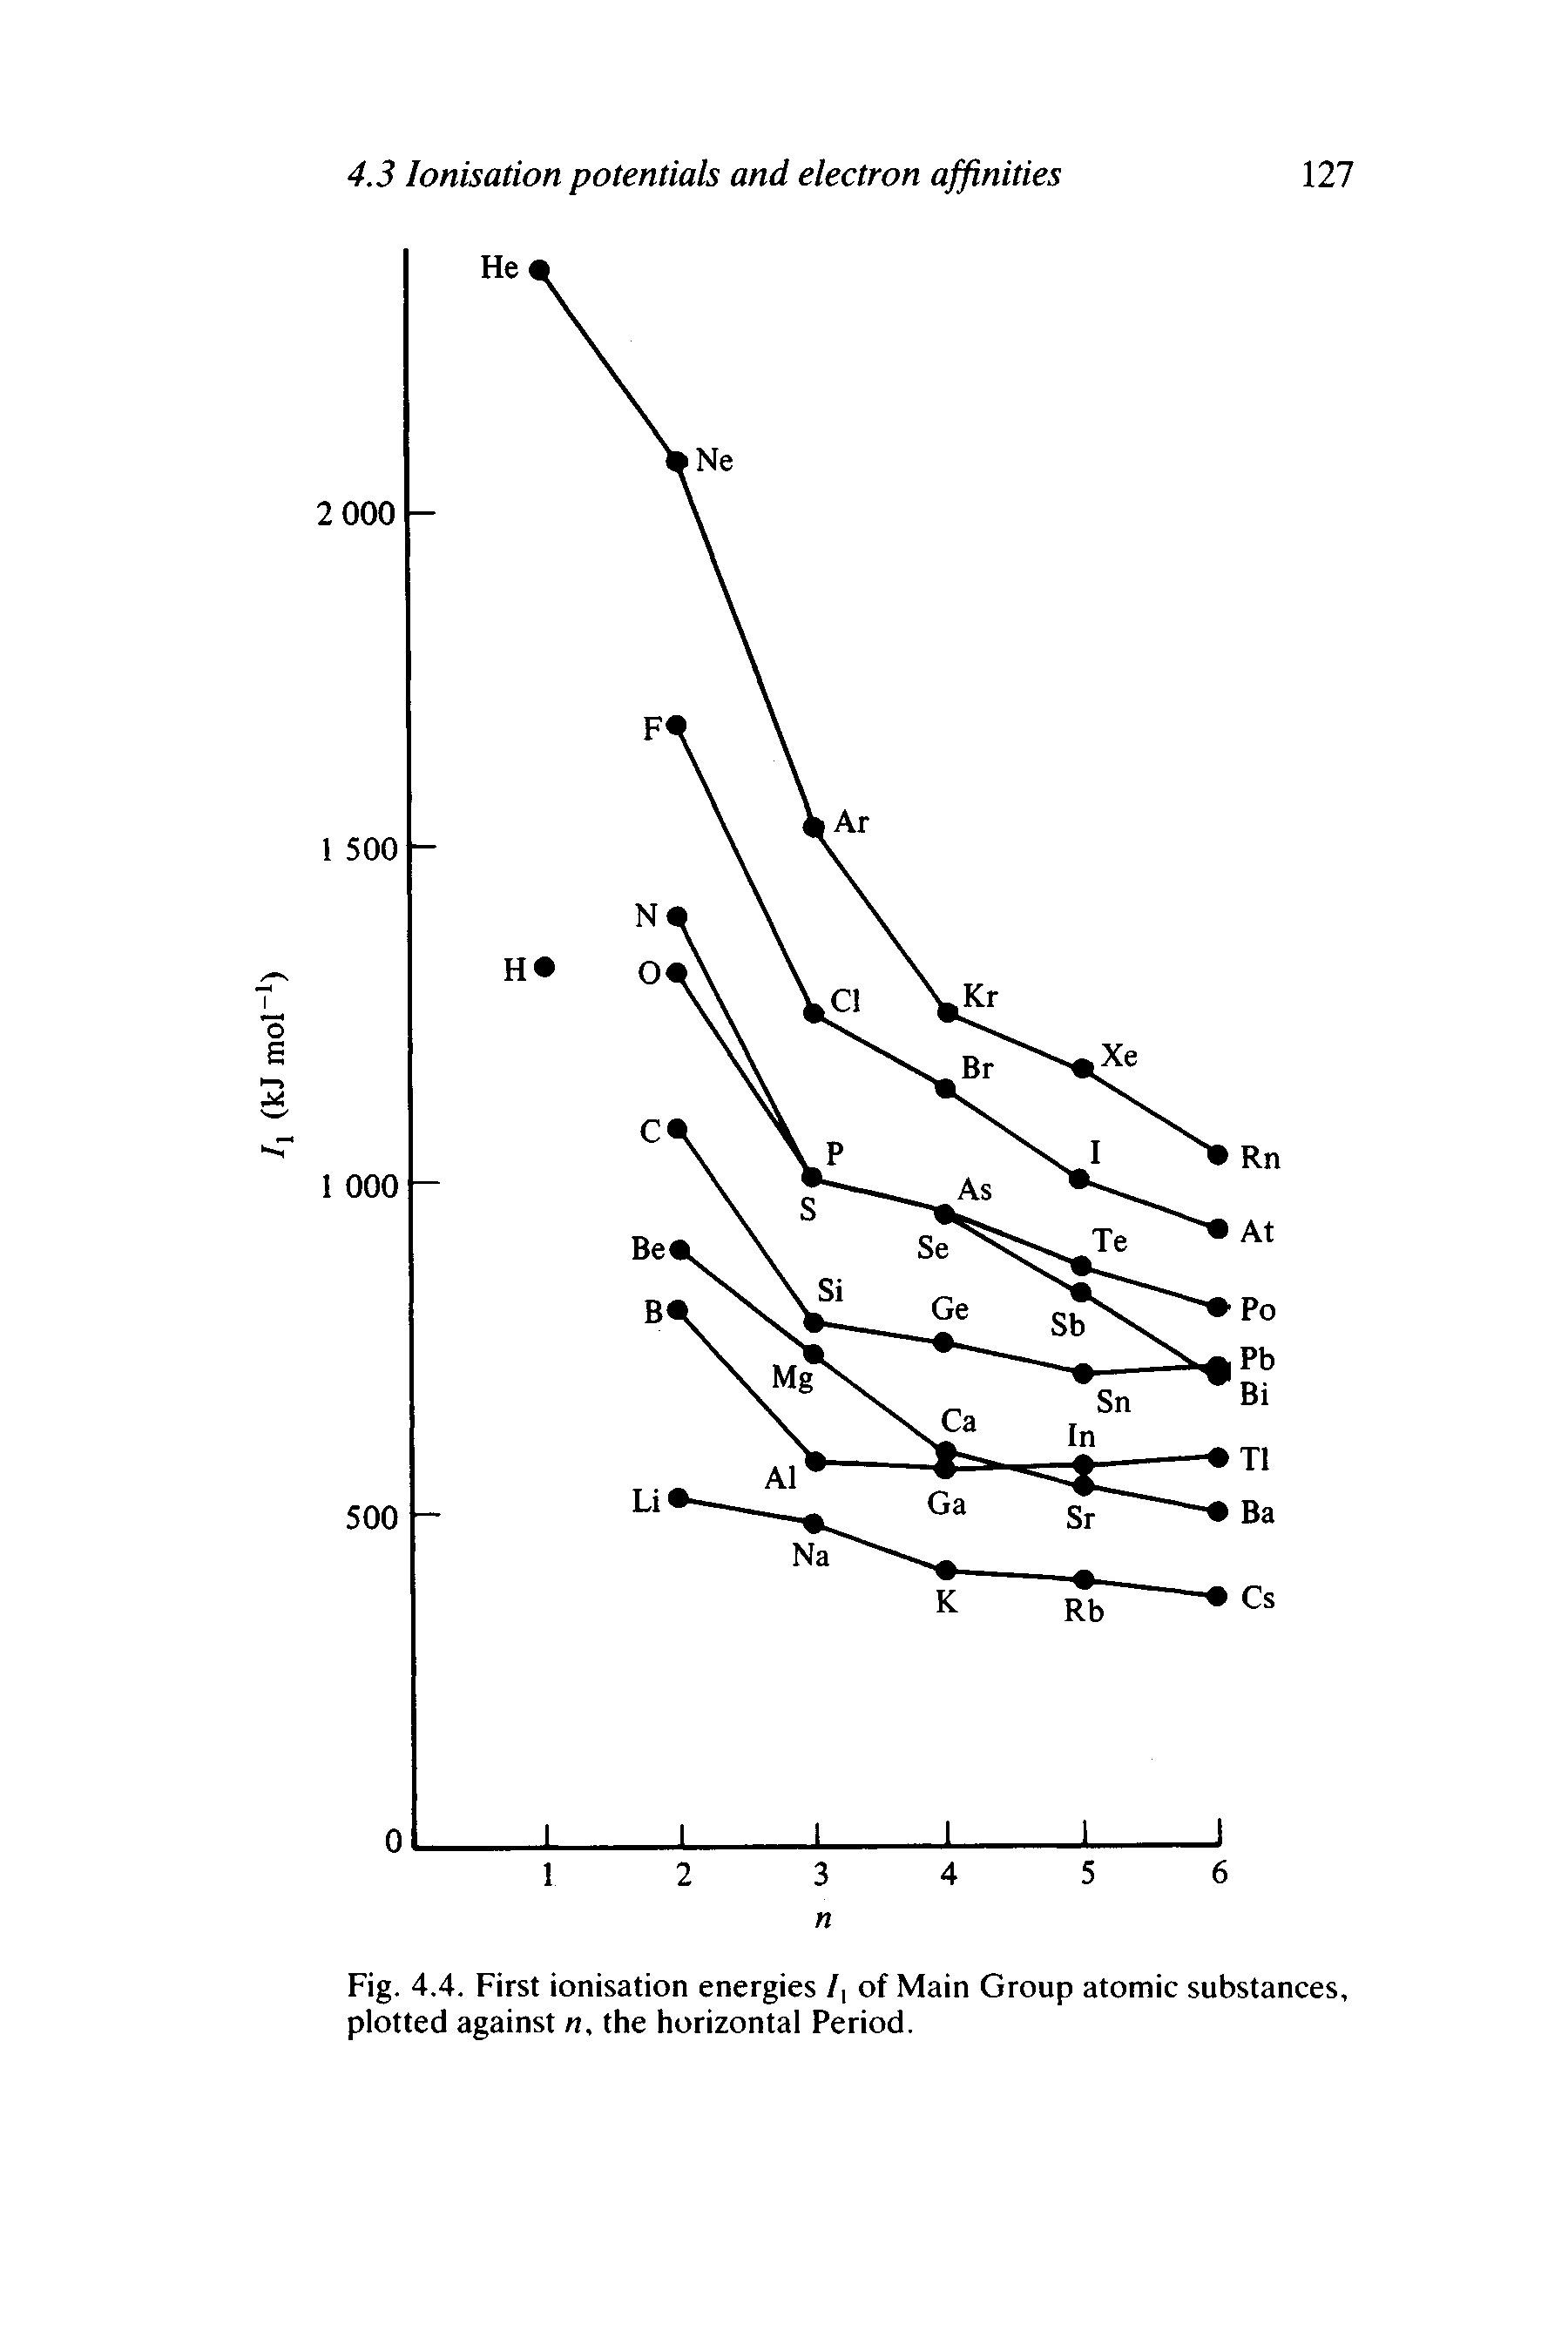 Fig. 4.4. First ionisation energies /, of Main Group atomic substances, plotted against n. the horizontal Period.